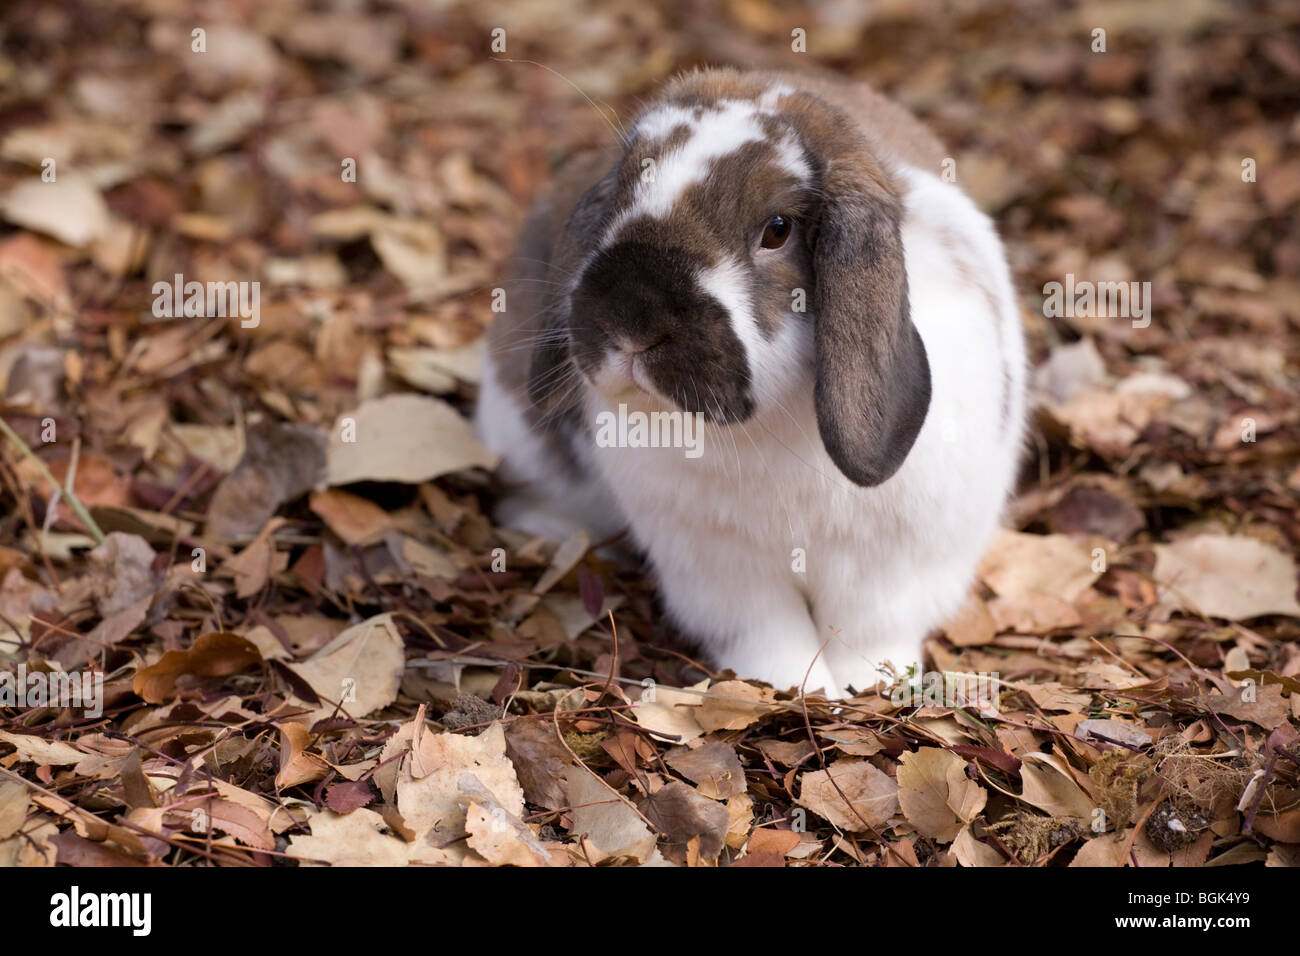 Holland Lop pet dwarf rabbit outdoors on fallen leaves on the ground in autumn Stock Photo